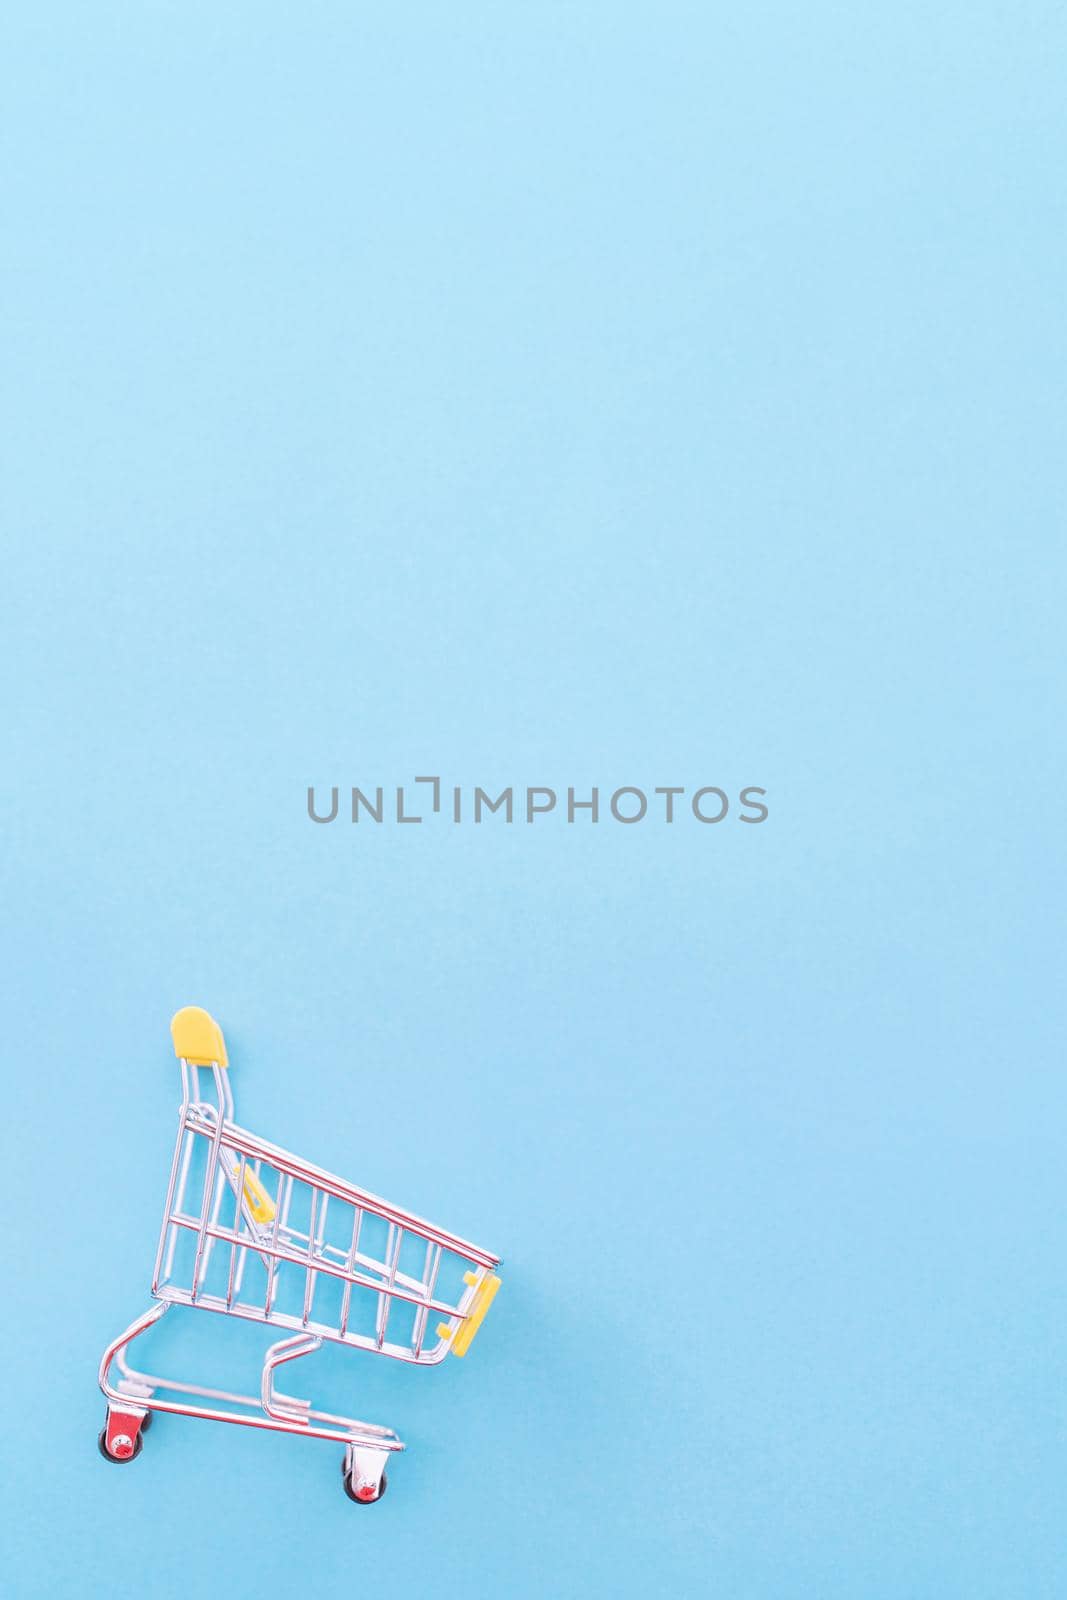 Abstract design element, annual sale, shopping season concept, mini yellow cart with colorful paper bag on pastel blue background, top view, flat lay